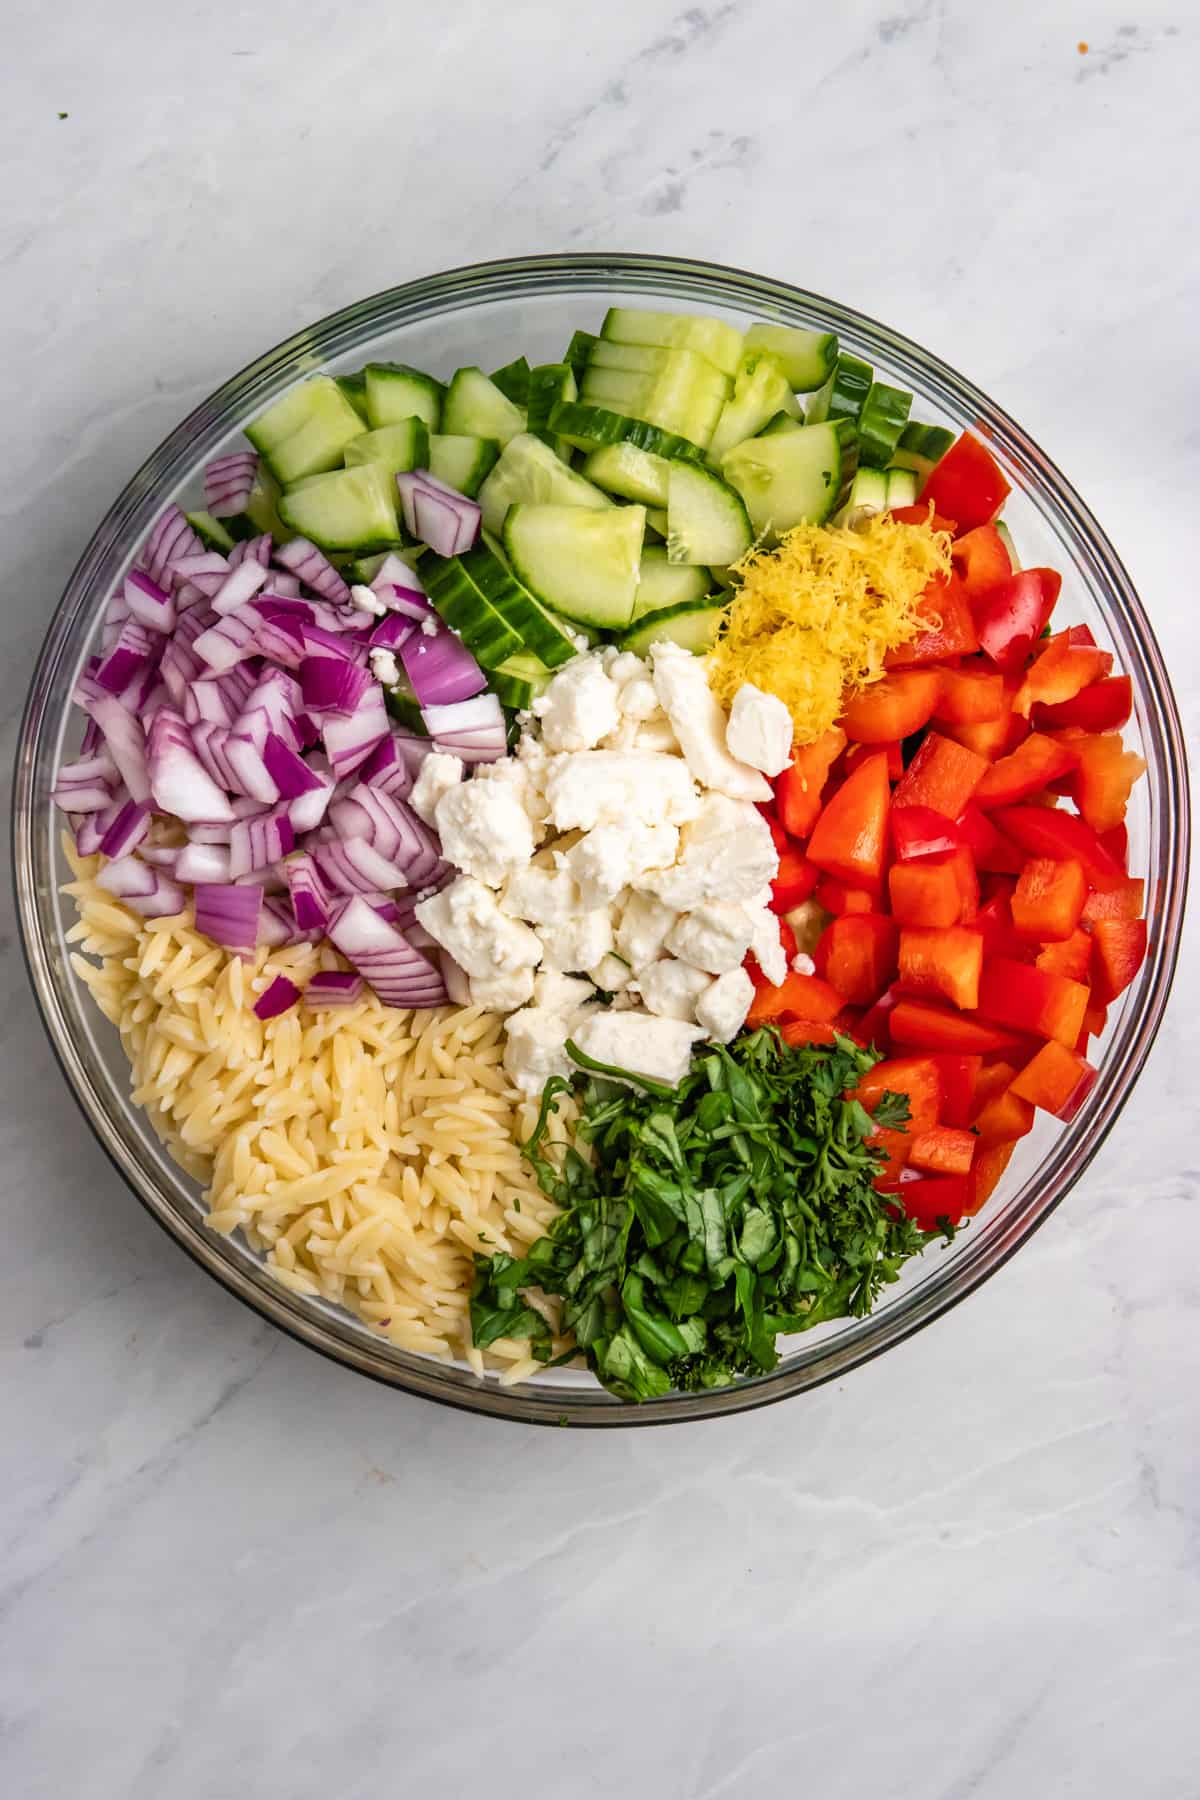 Overhead view of lemon orzo salad ingredients in mixing bowl.